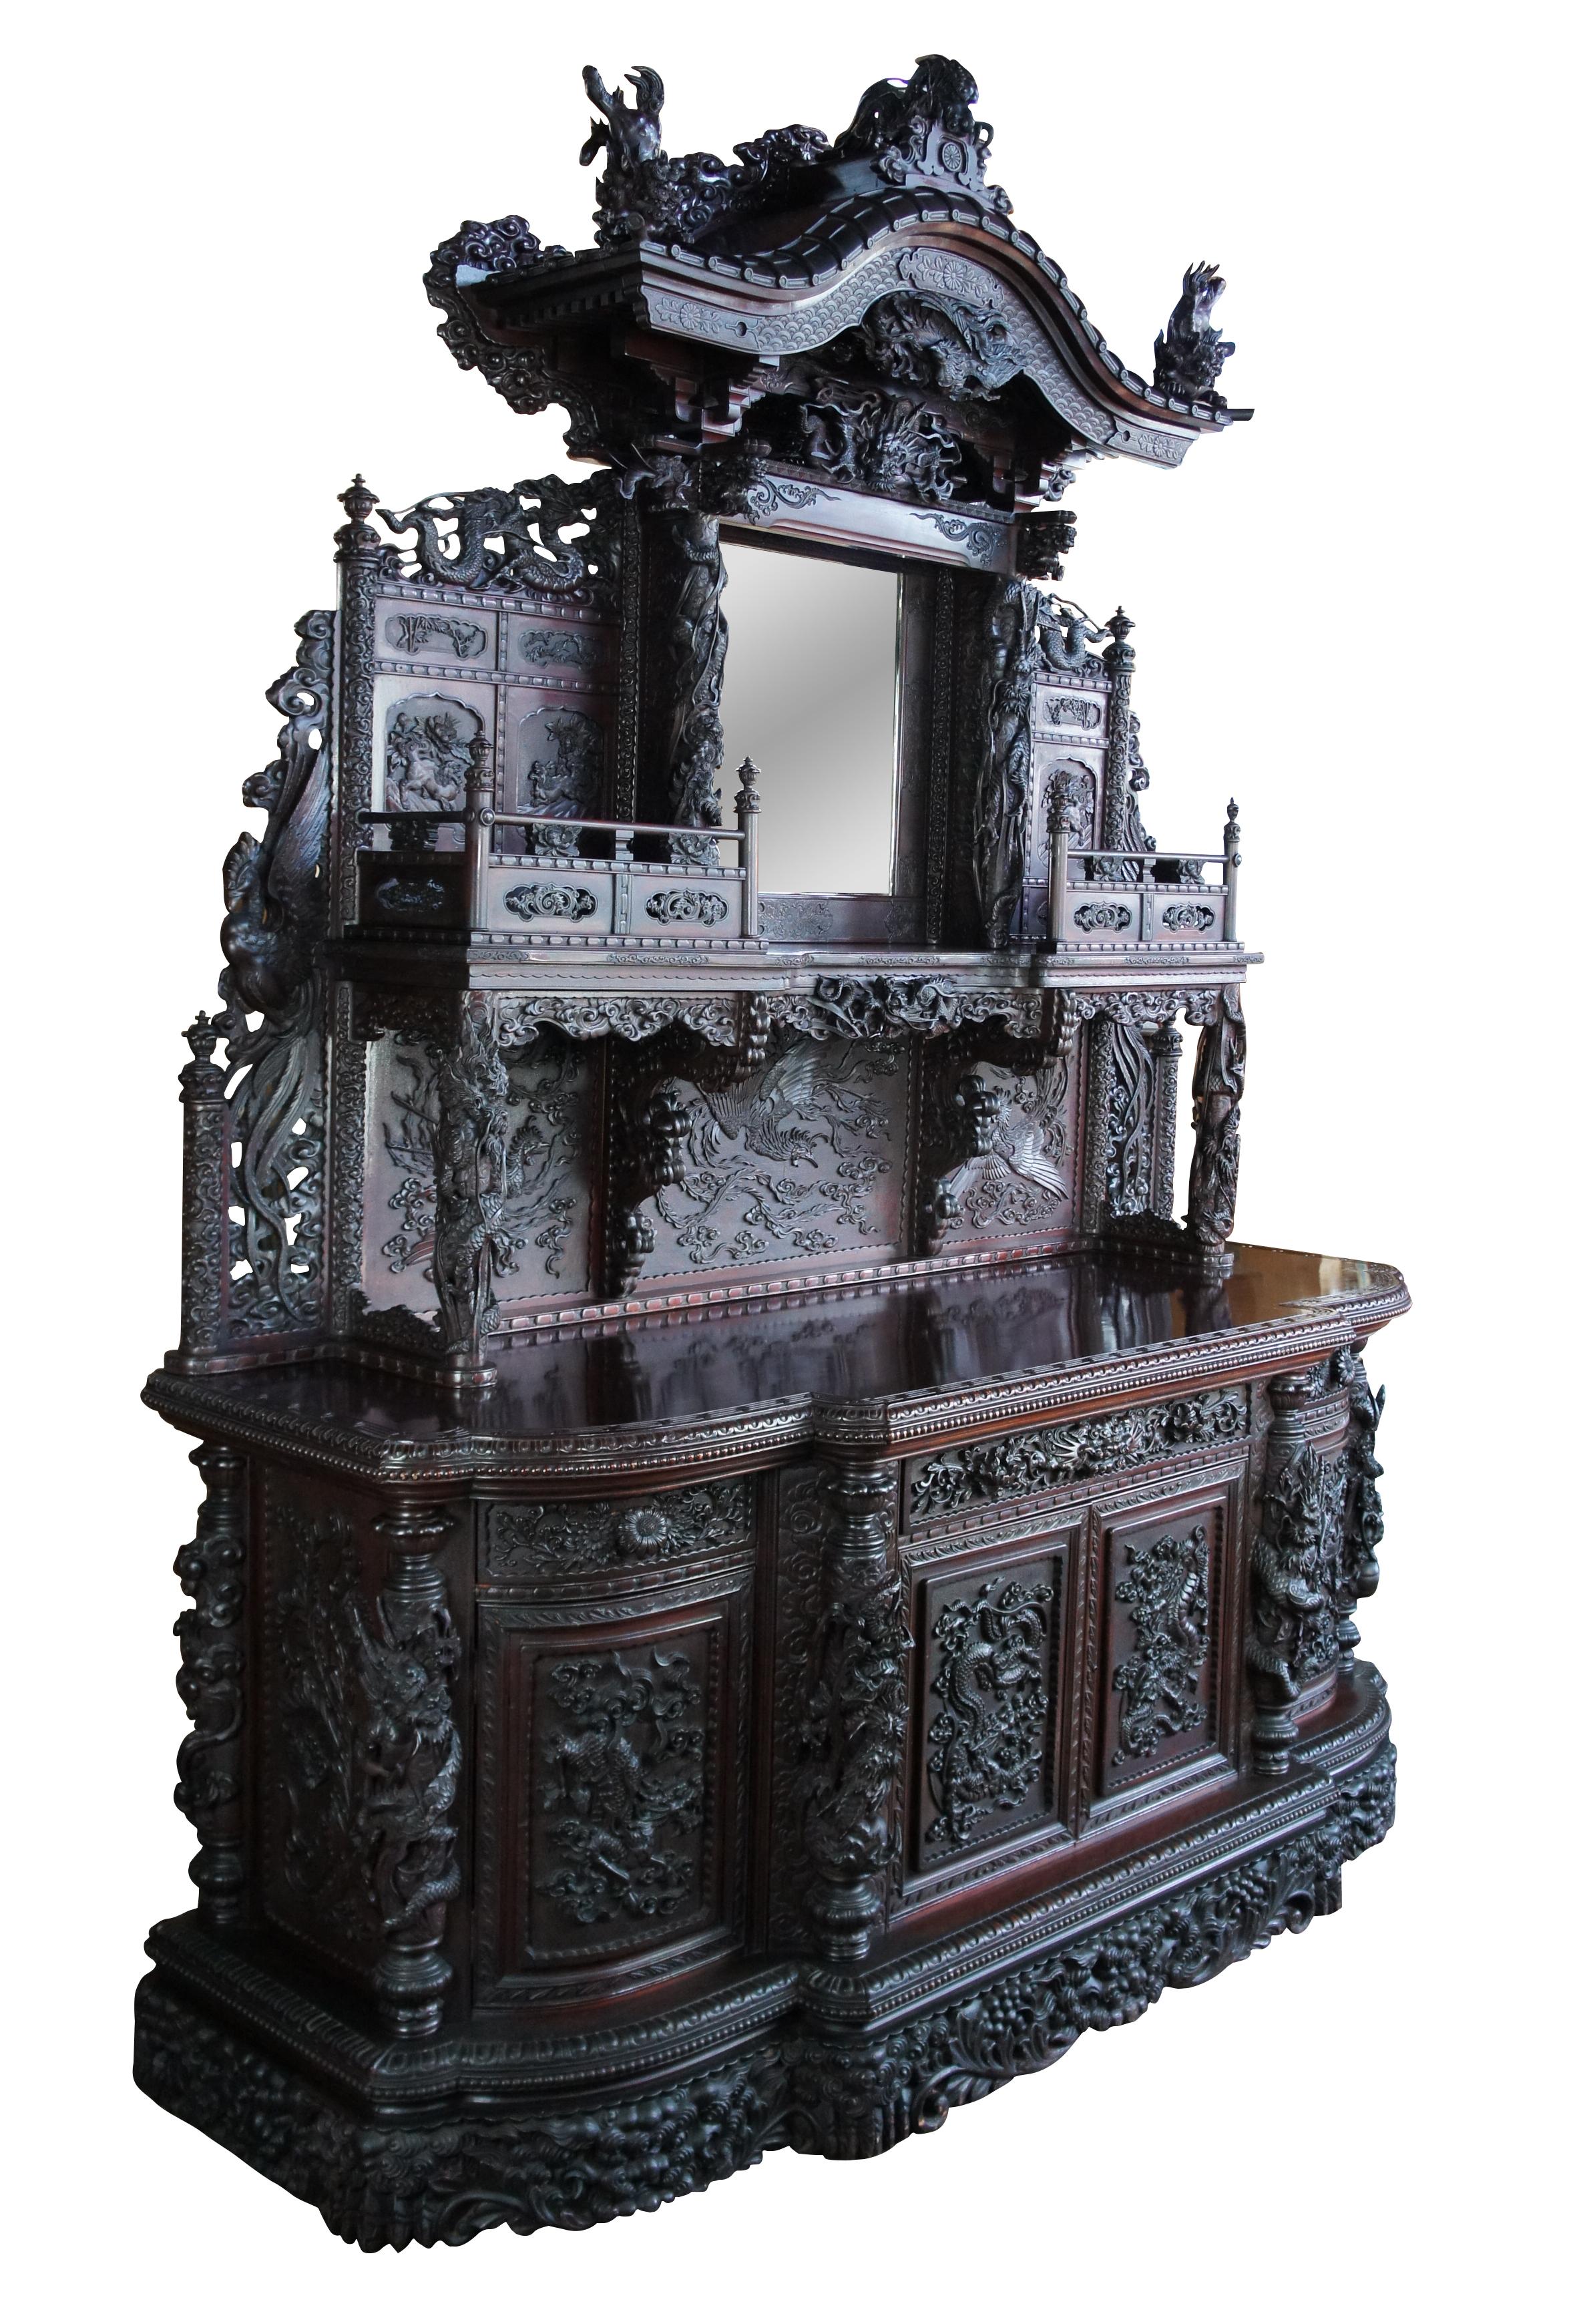 Important 19th C. Japanese Meiji Period ornately carved extreme high relief, credenza or bar back. Meticulously designed with one of a kind tooling. A breakfront form with three drawers over lower cabinets, topped by a hutch with shelves and central